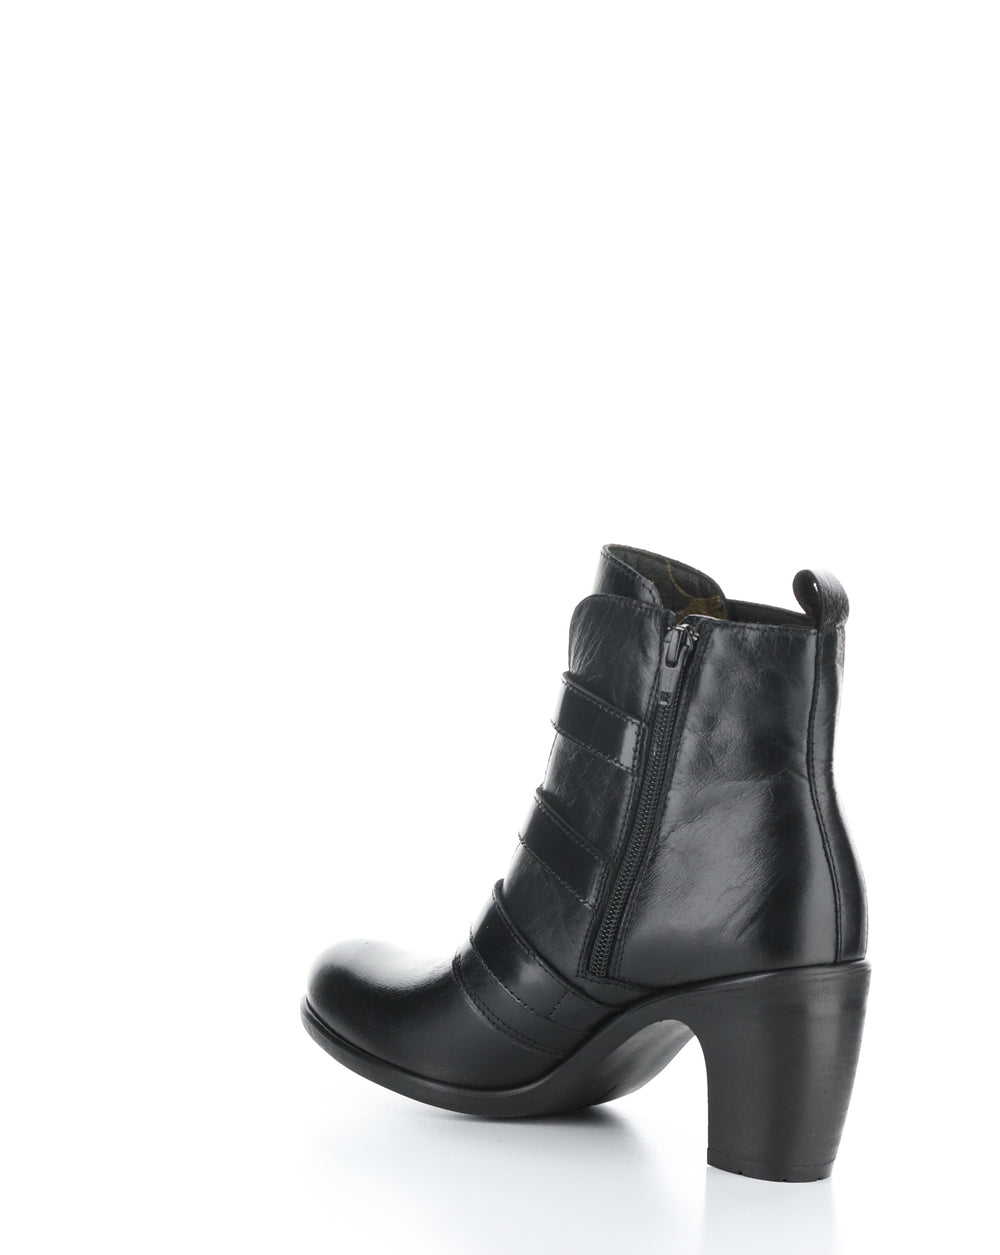 KLEA012FLY 000 BLACK Round Toe Boots